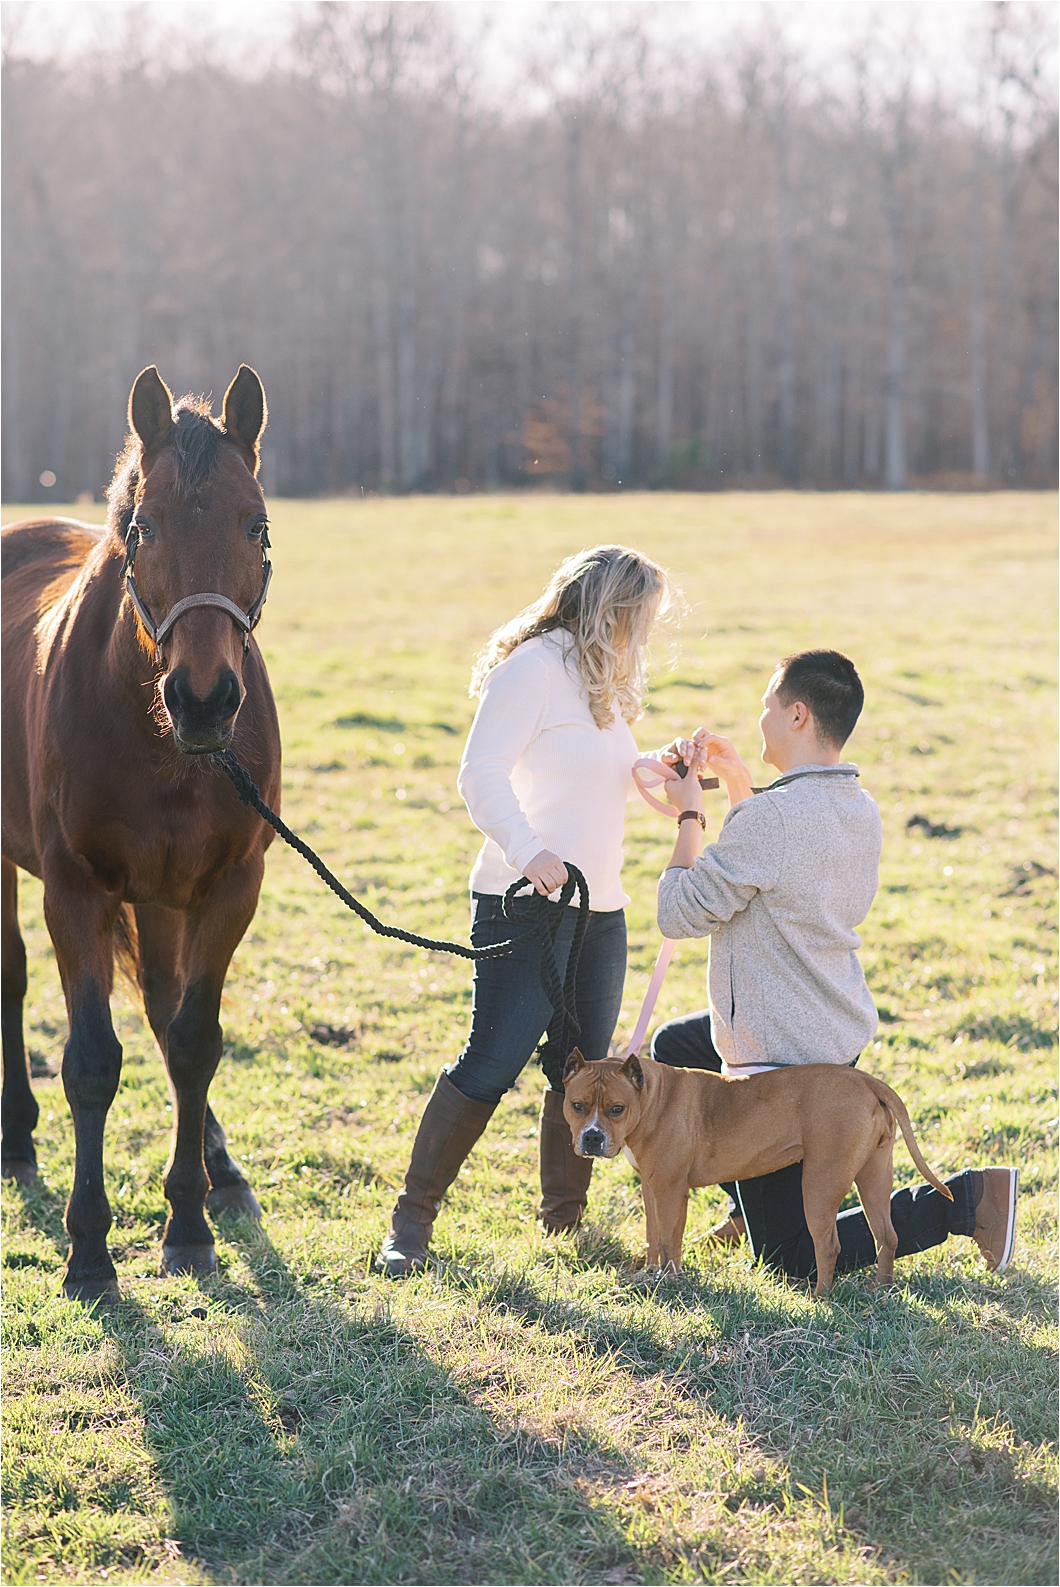 Surprise Marriage Proposal at Horse Ranch in Winston Salem, North Carolina